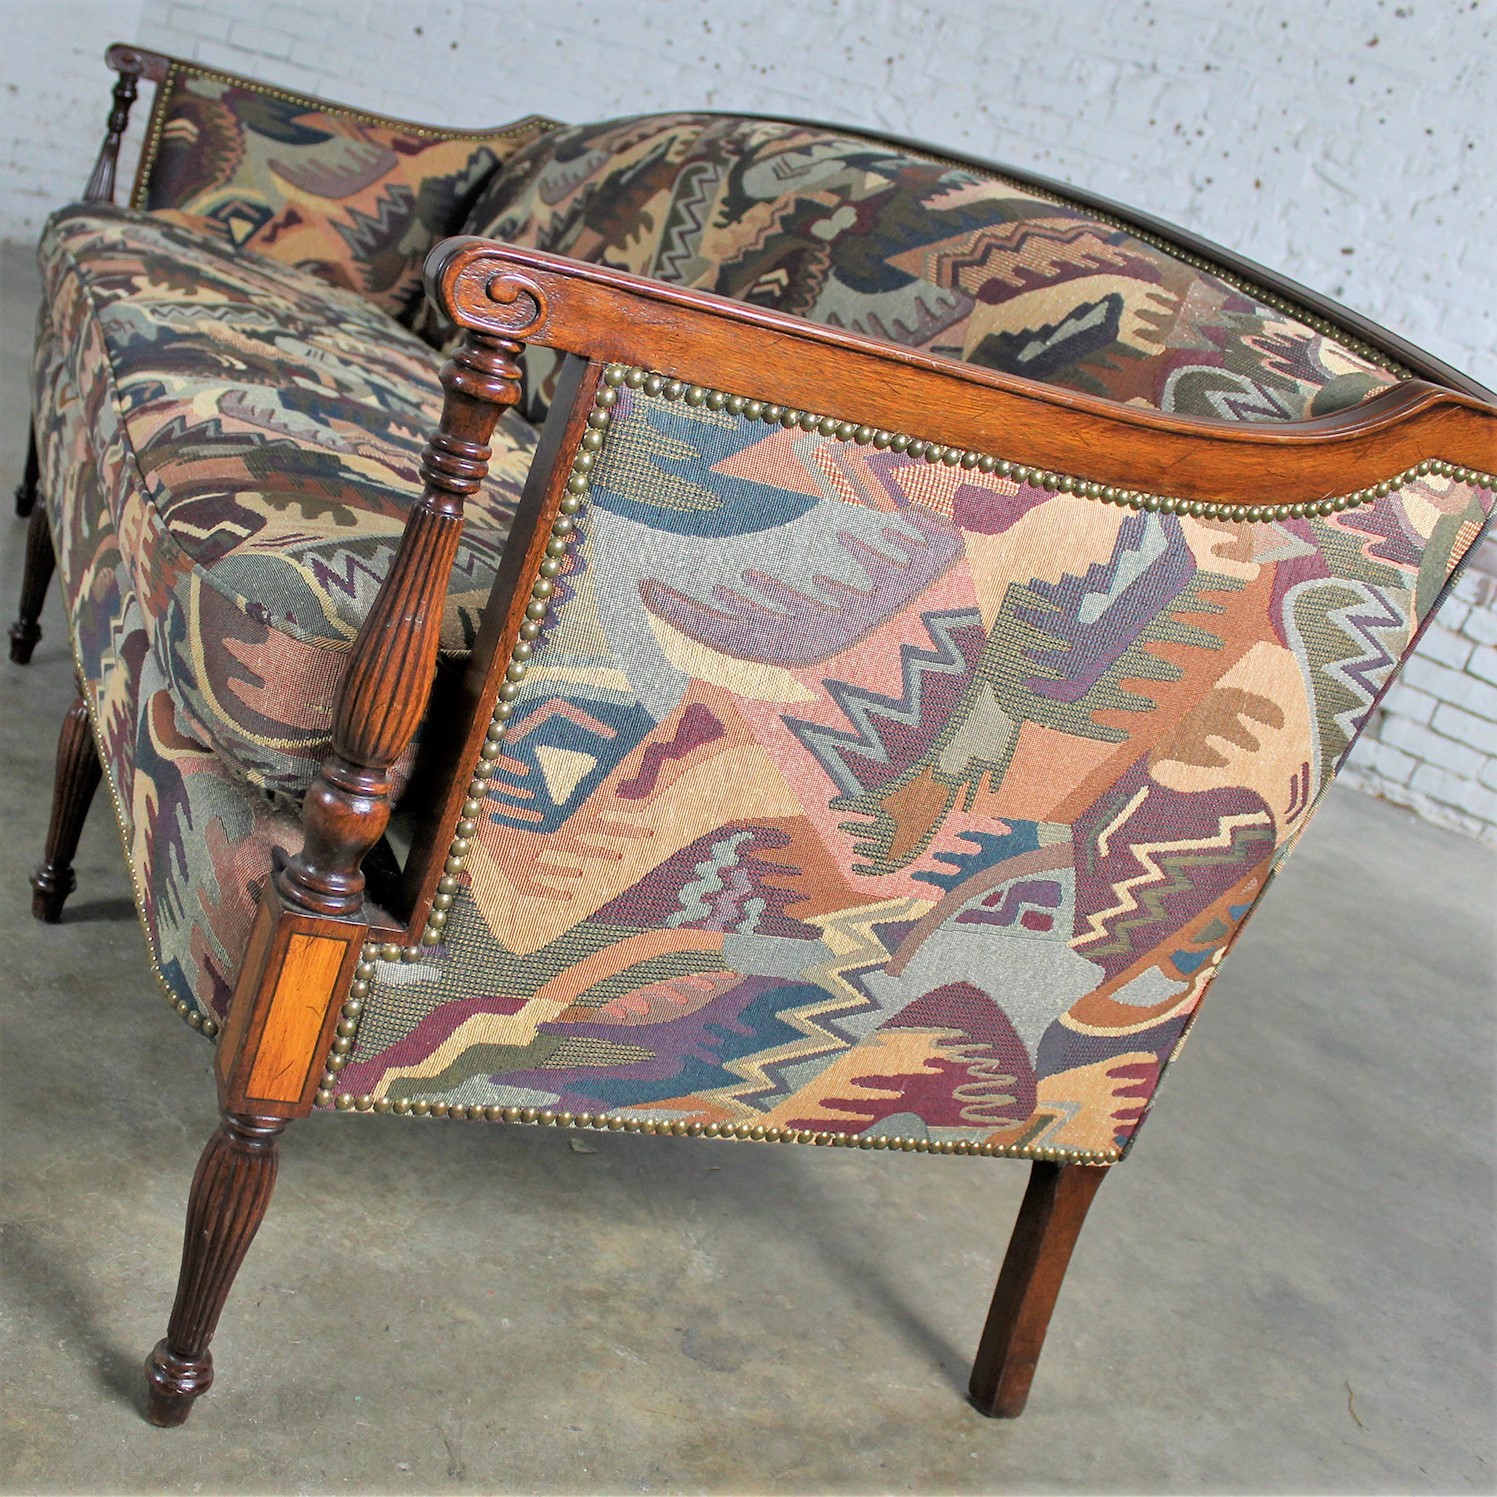 Vintage Classical American Federal Carved Sheraton Style Settee Sofa in Contemporary Fabric